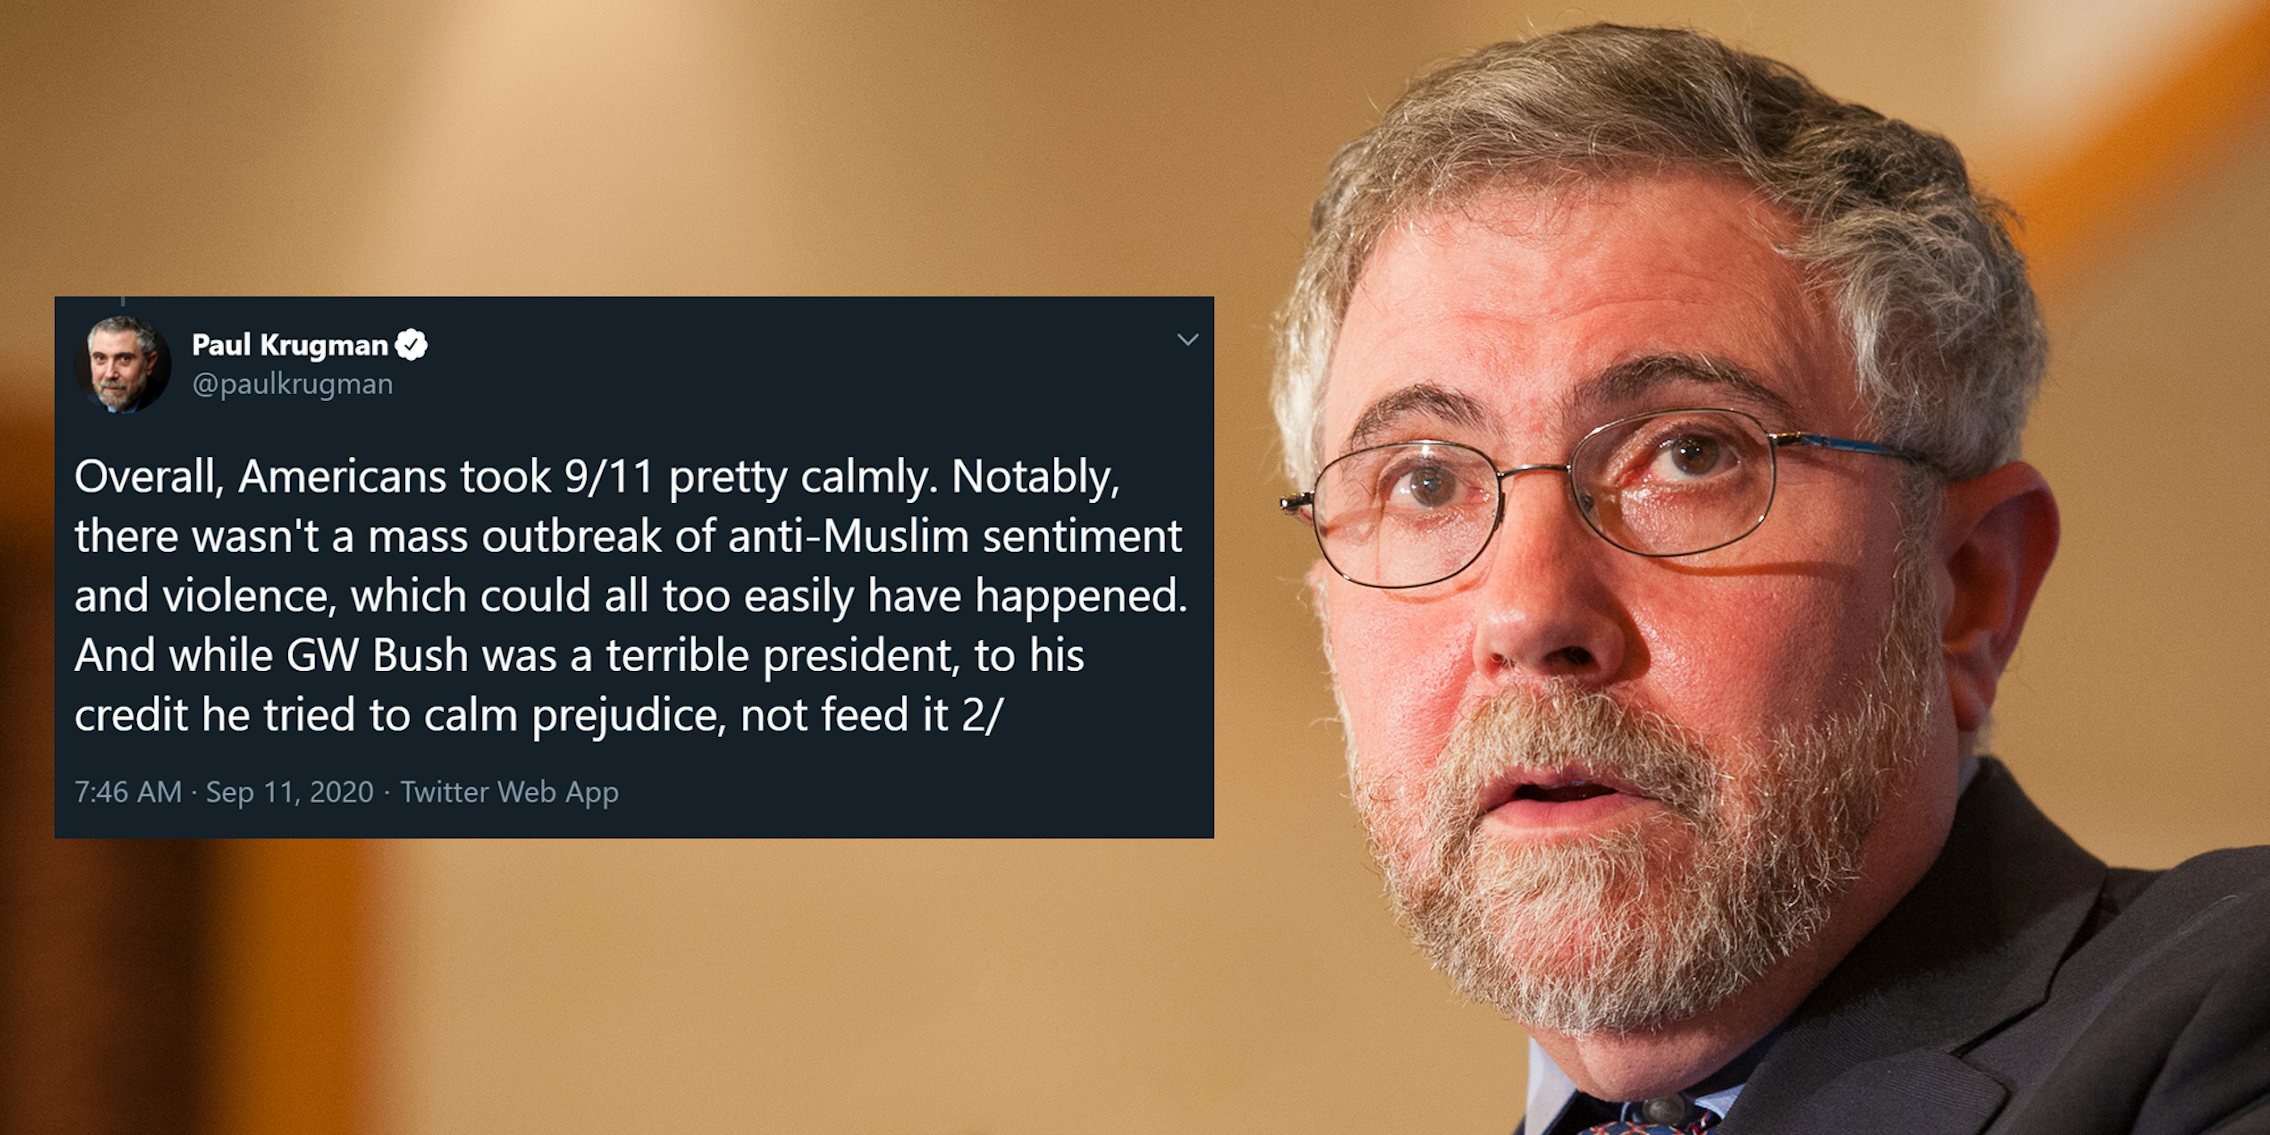 Paul Krugman 'Overall, Americans took 9/11 pretty calmly. Notably, there wasn't a mass outbreak of anti-Muslim sentiment and violence, which could all too easily have happened. And while GW Bush was a terrible president, to his credit he tried to calm prejudice, not feed it' tweet